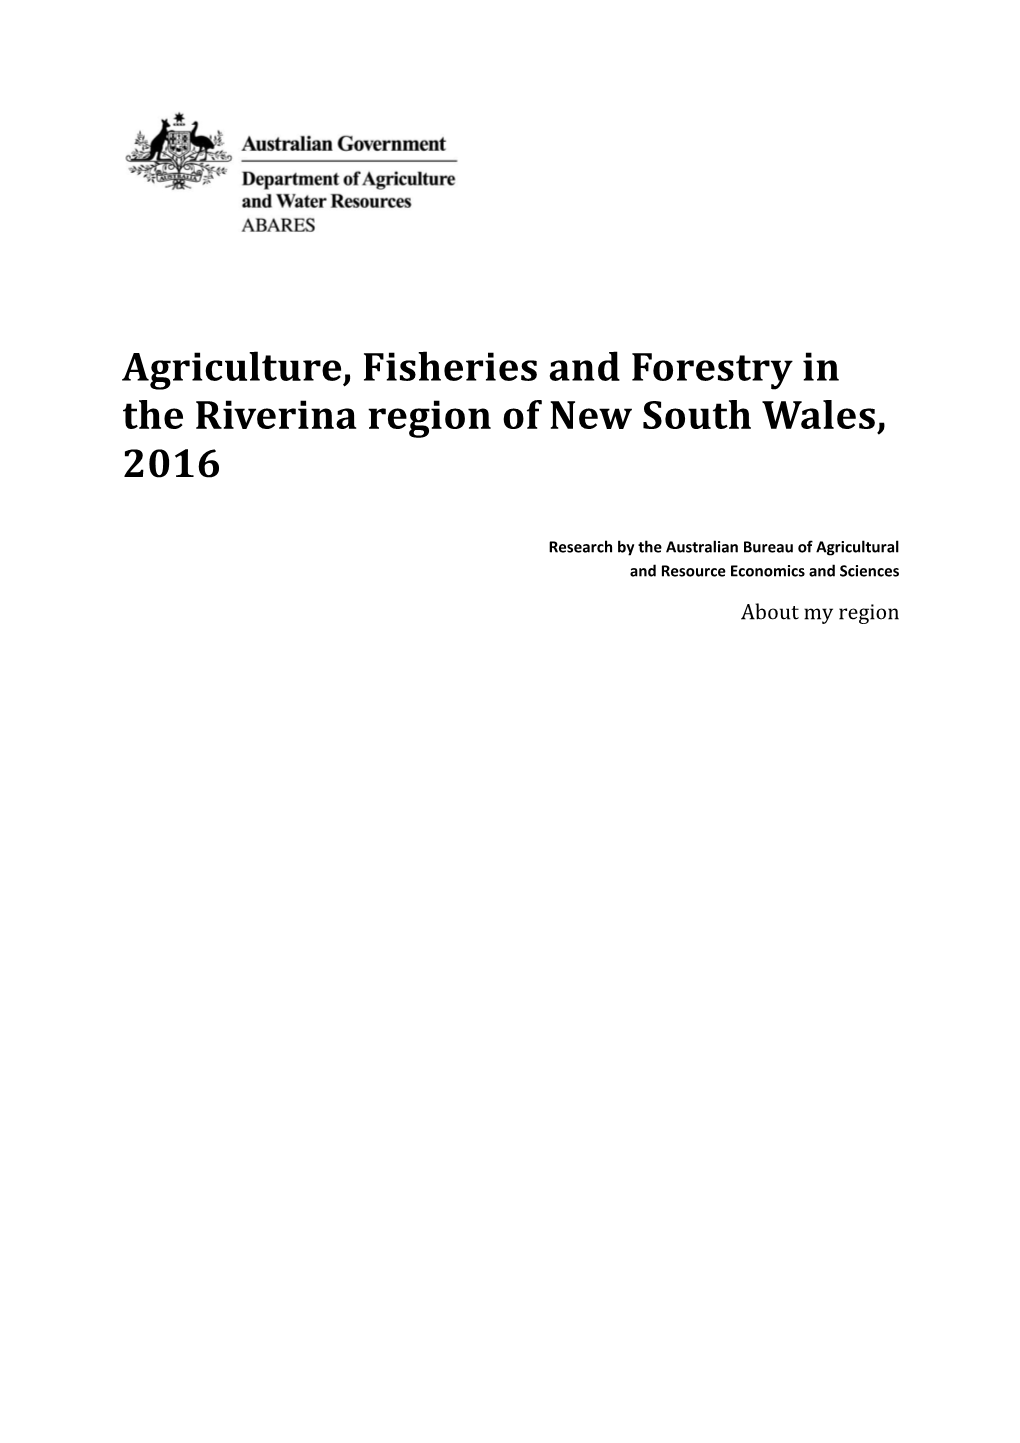 Agriculture, Fisheries and Forestry in the Riverina Region of New South Wales, 2016